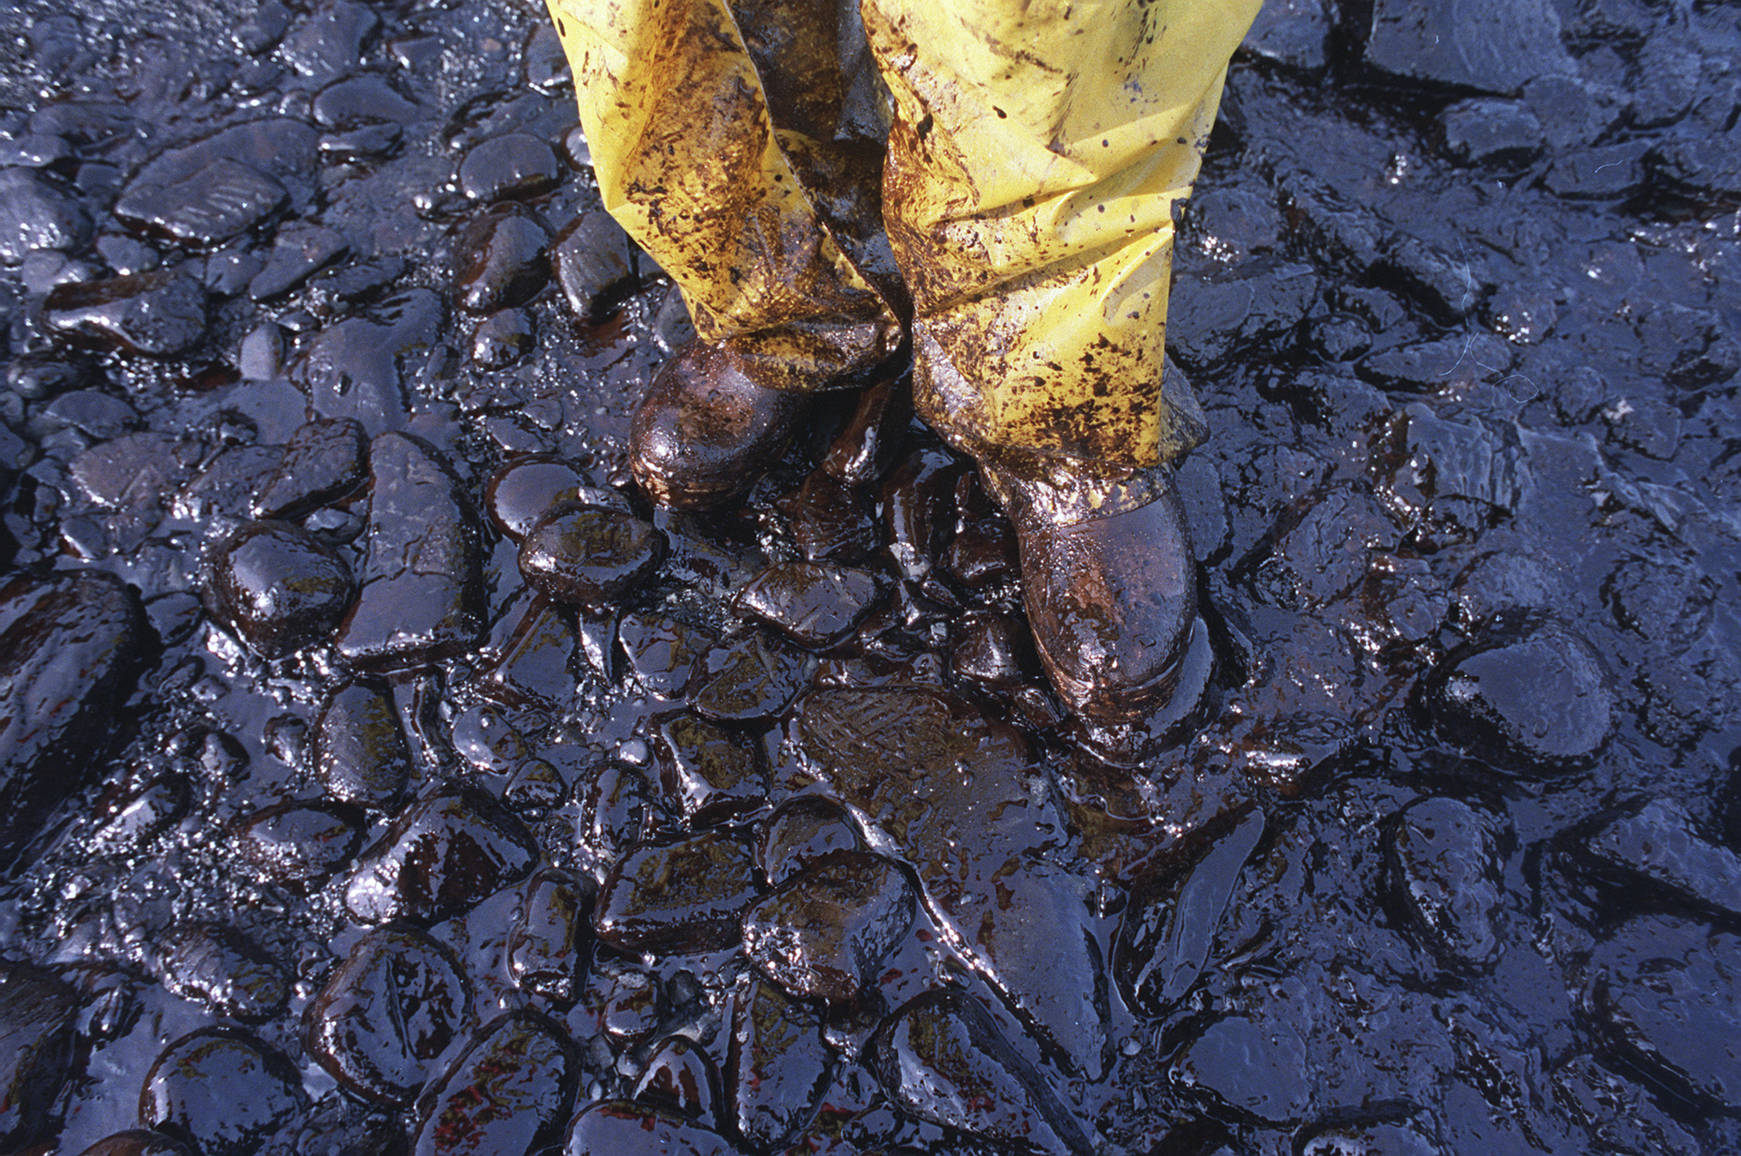 In this April 11, 1989 photo, thick crude oil that washed up on the cobble beach of Evans Island sticks to the boots and pants of a local fisherman in Prince William Sound, Alaska. The Exxon Valdez tanker oil spill on March 24 blackened hundreds of miles of coastline. (John Gaps III | Associated Press File)